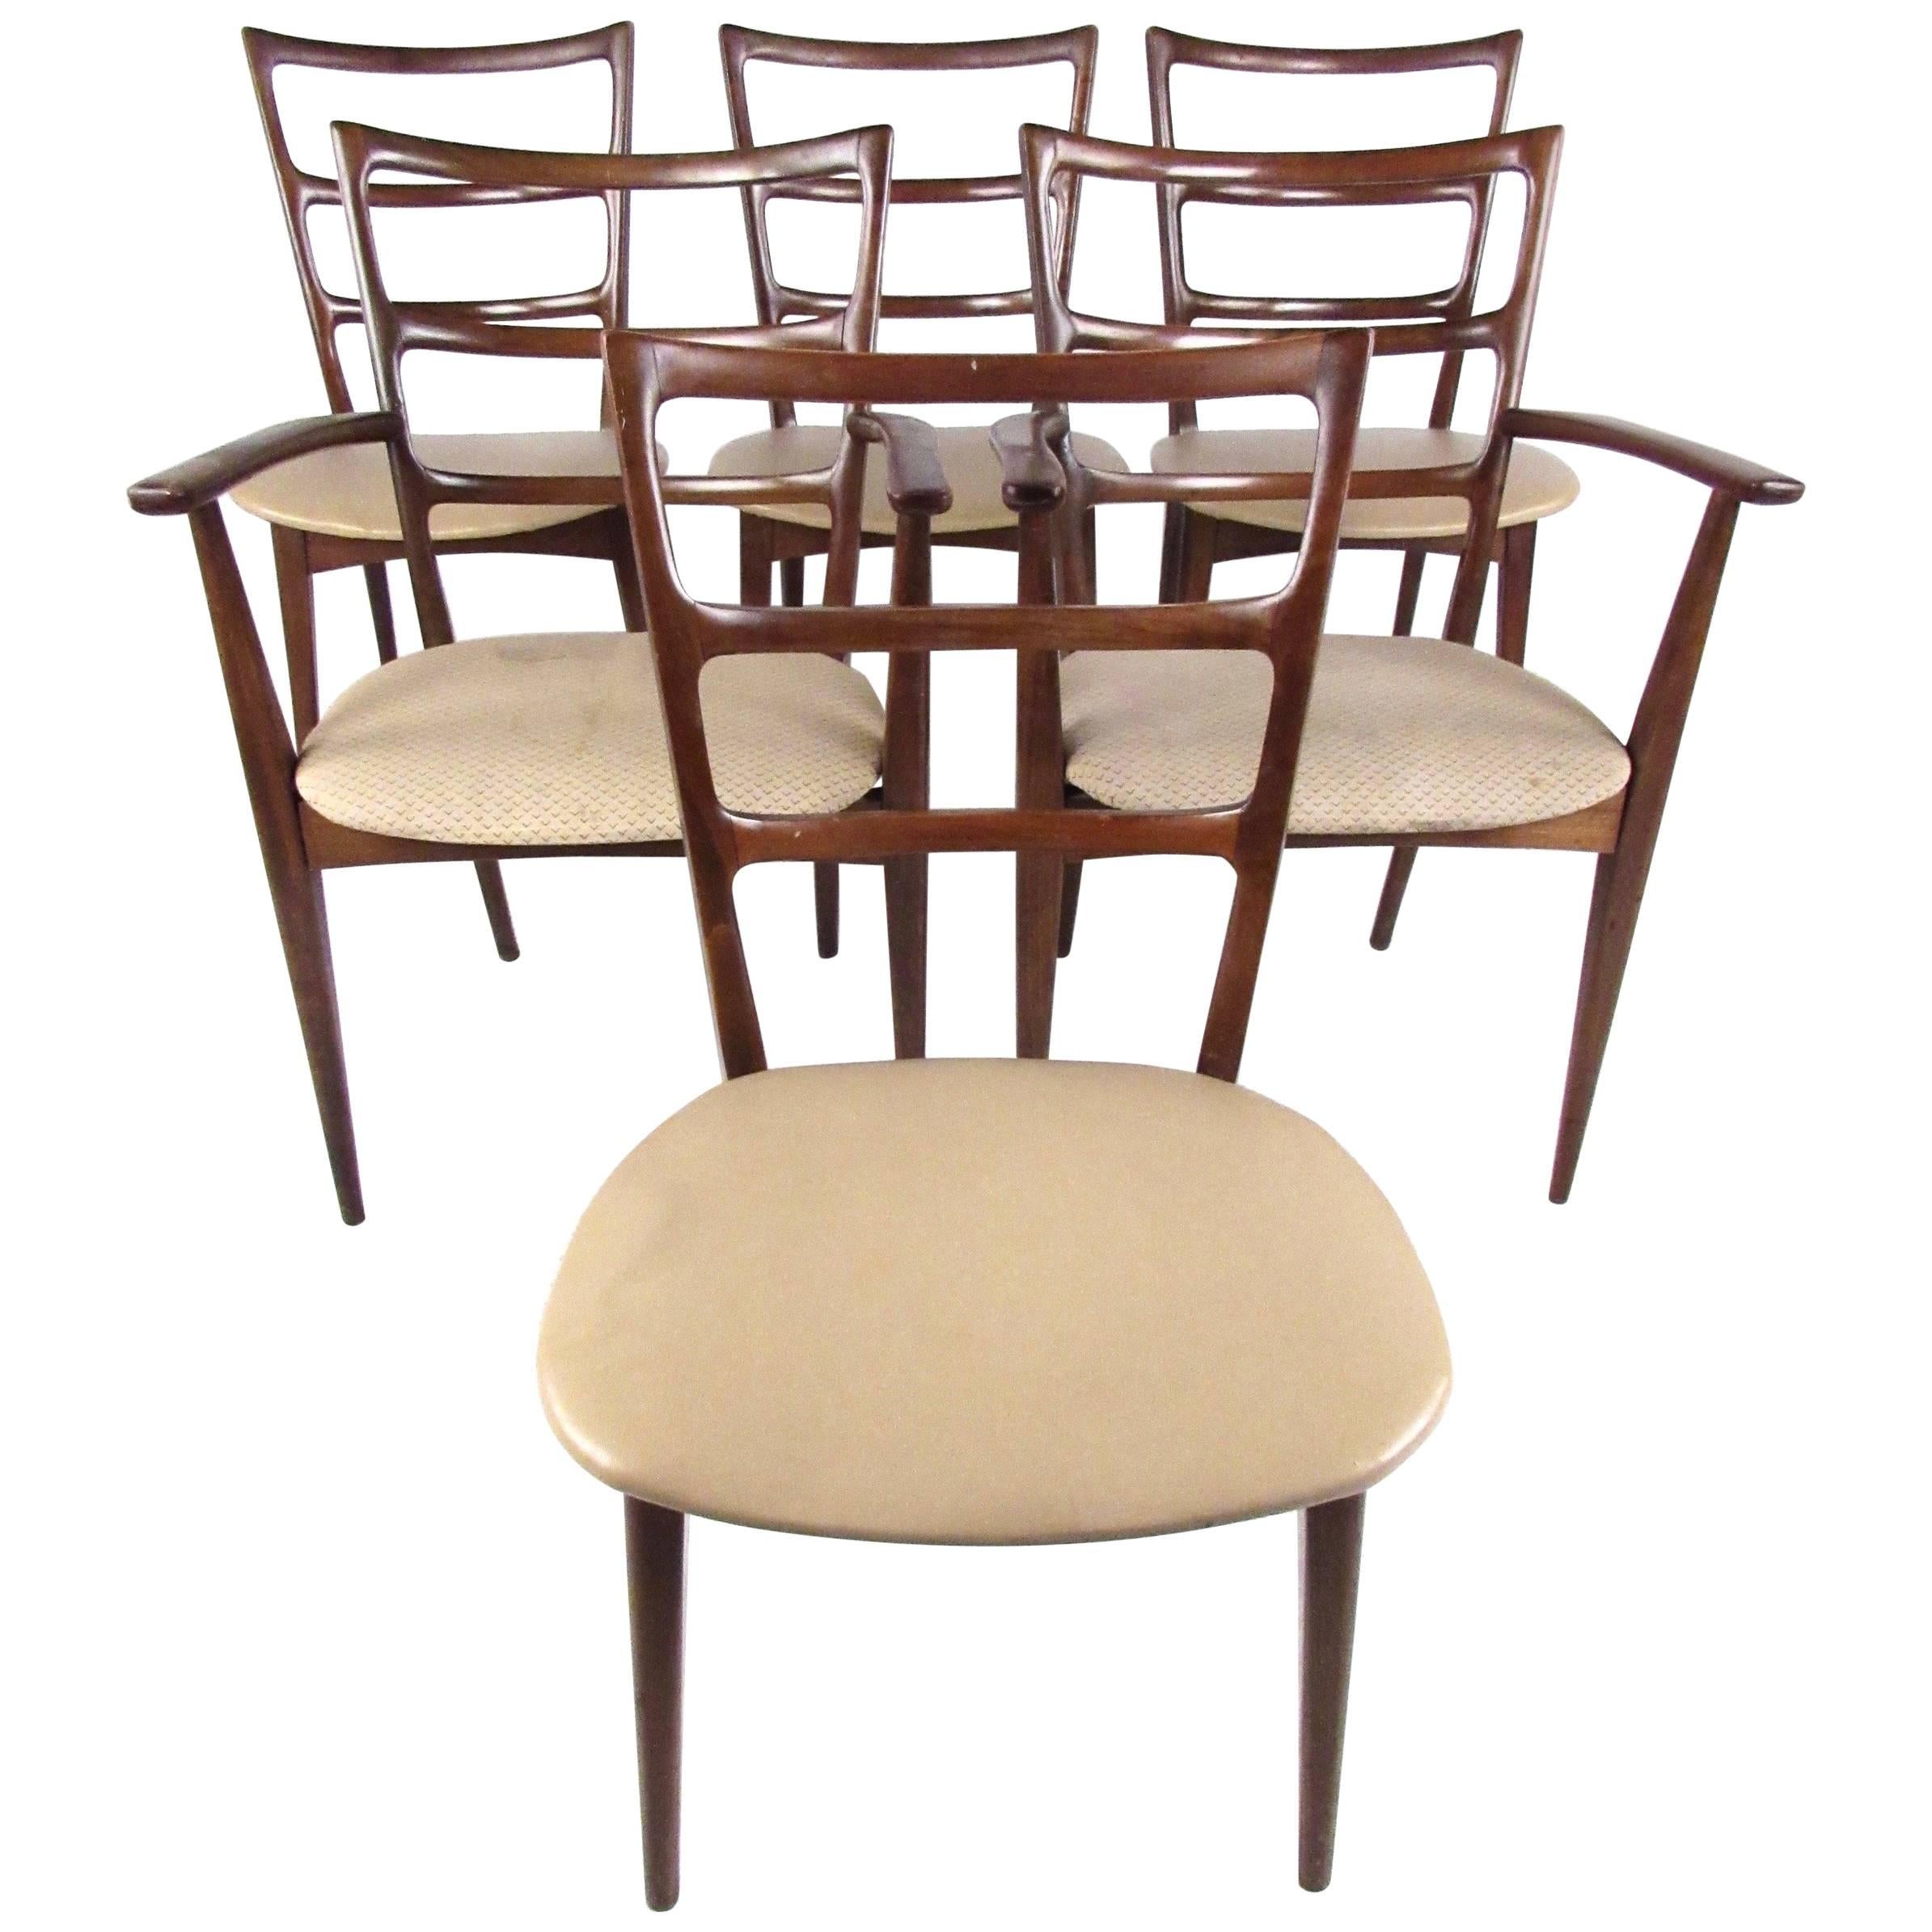 Six Ladder Back Dining Chairs